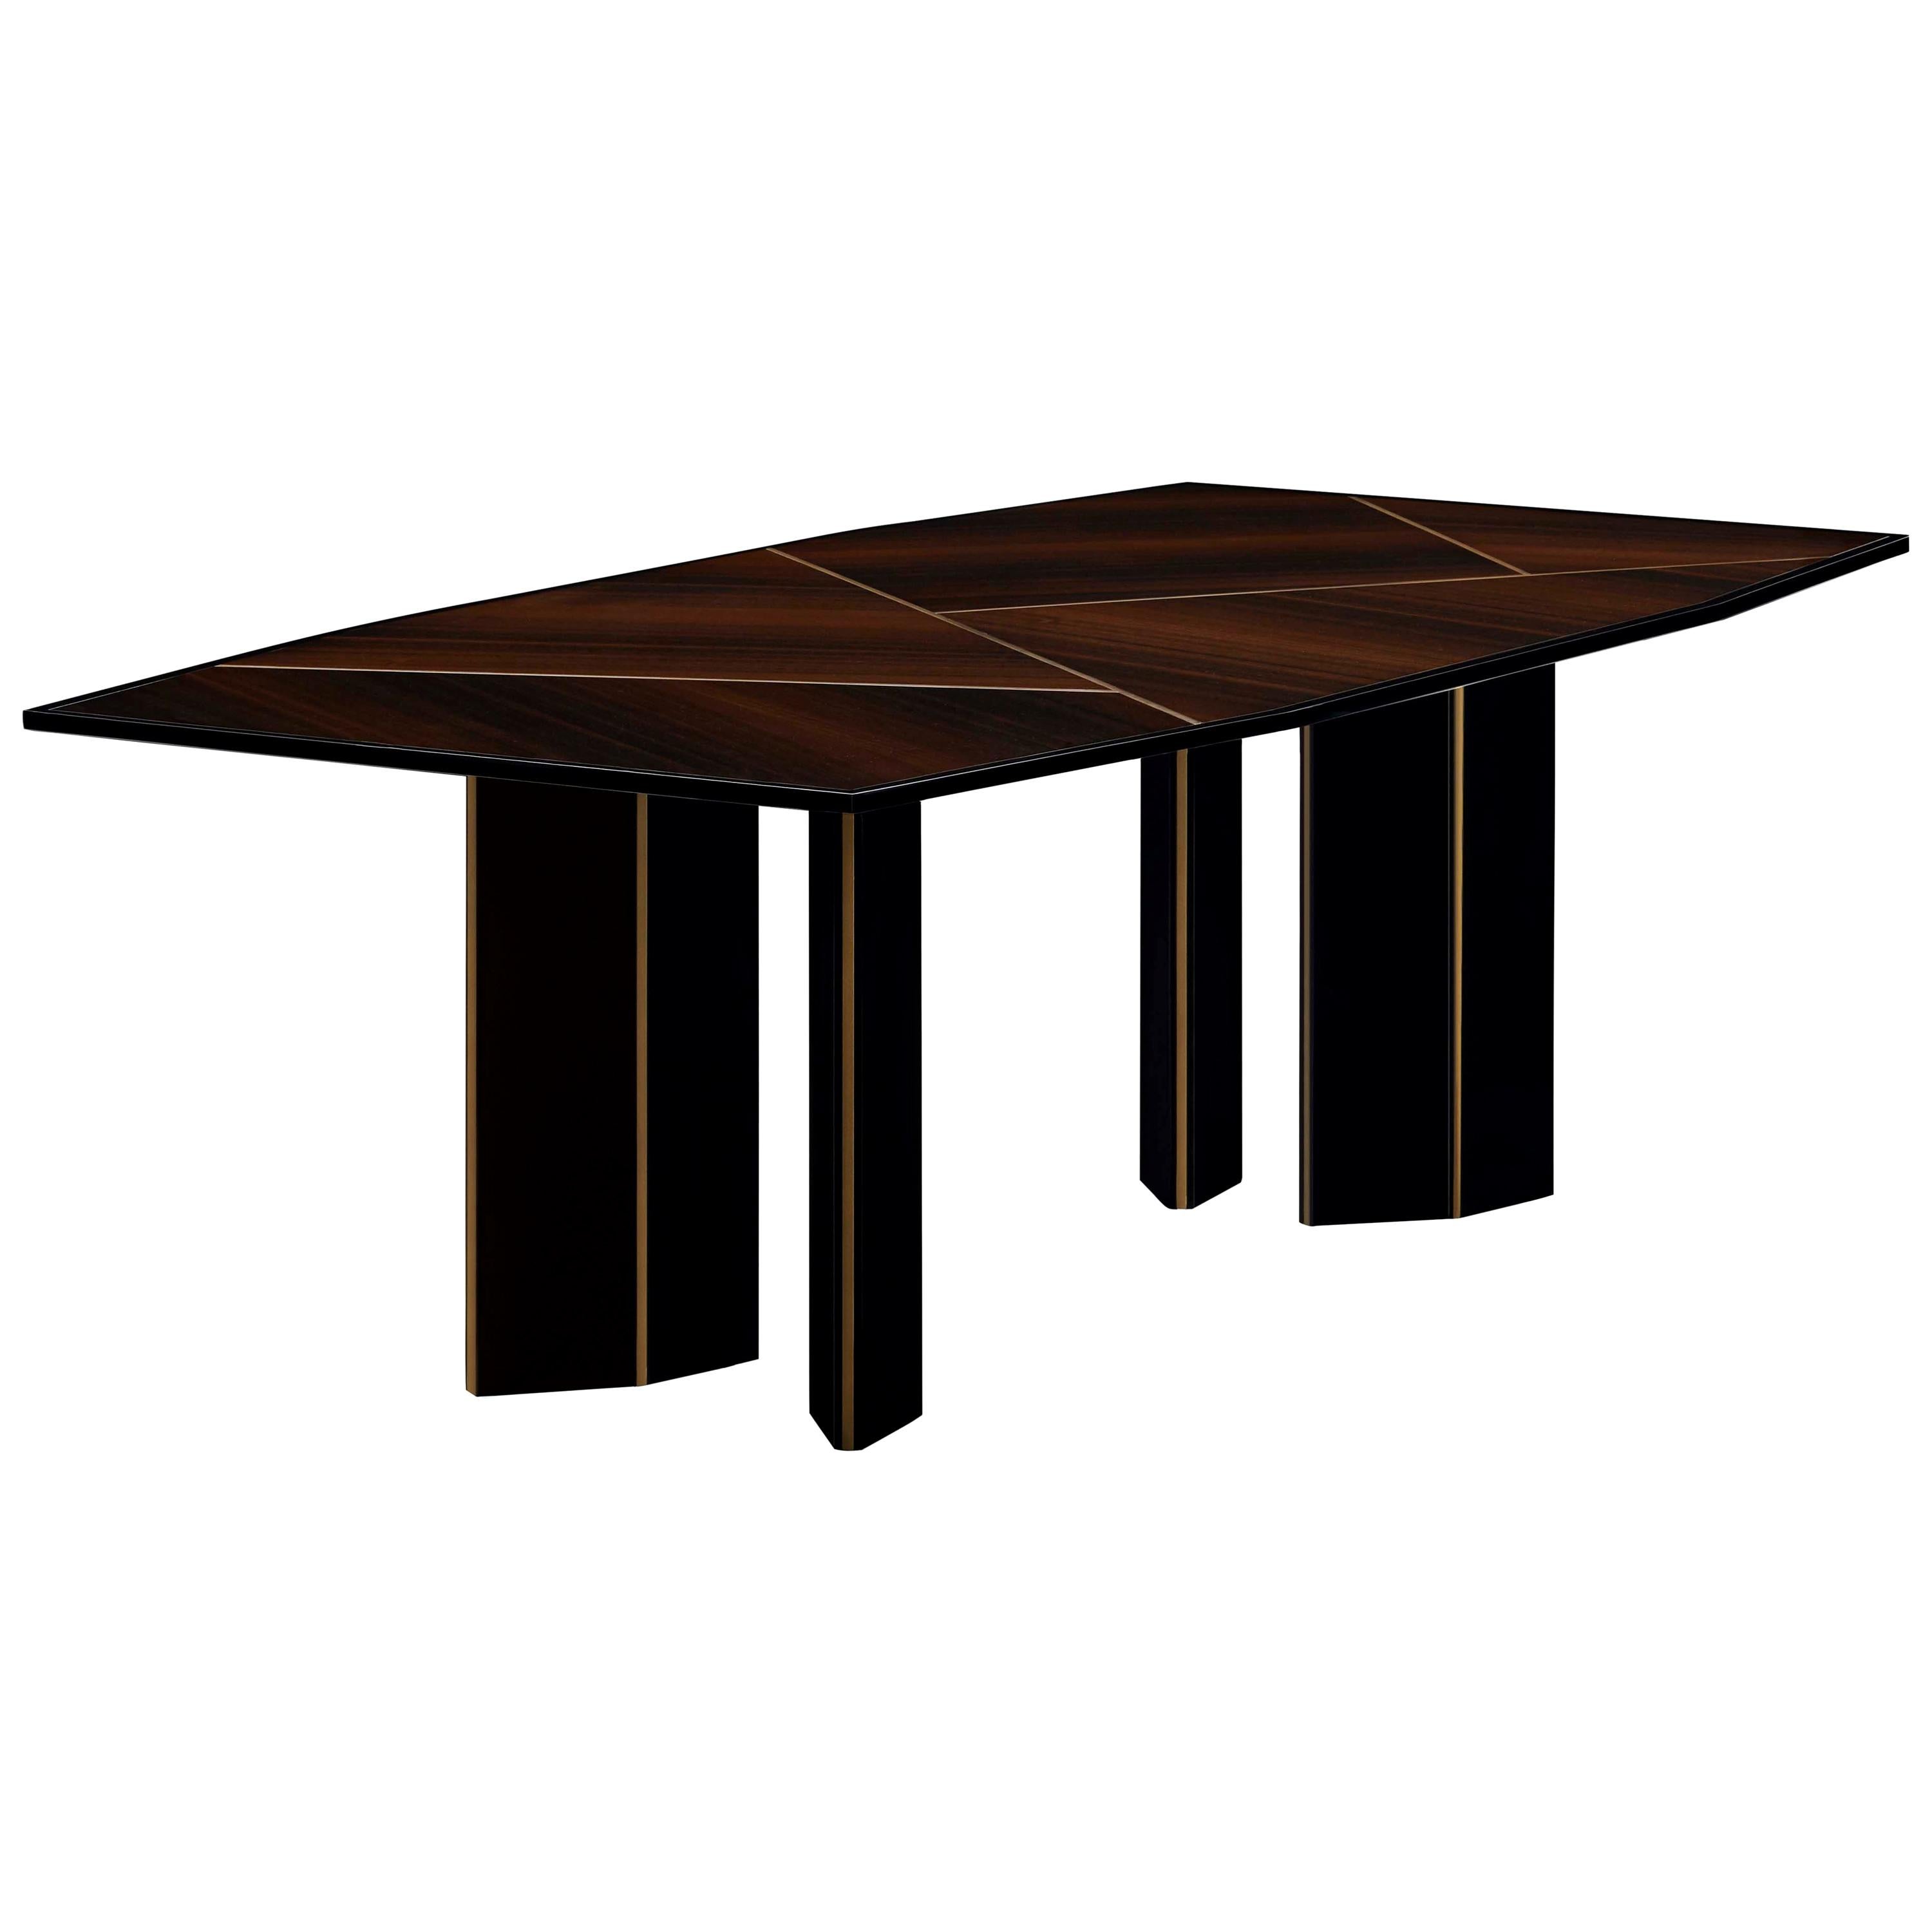 Lorca Dining Table in Eucalyptus Fumé with Antique Brass Color Trimmings